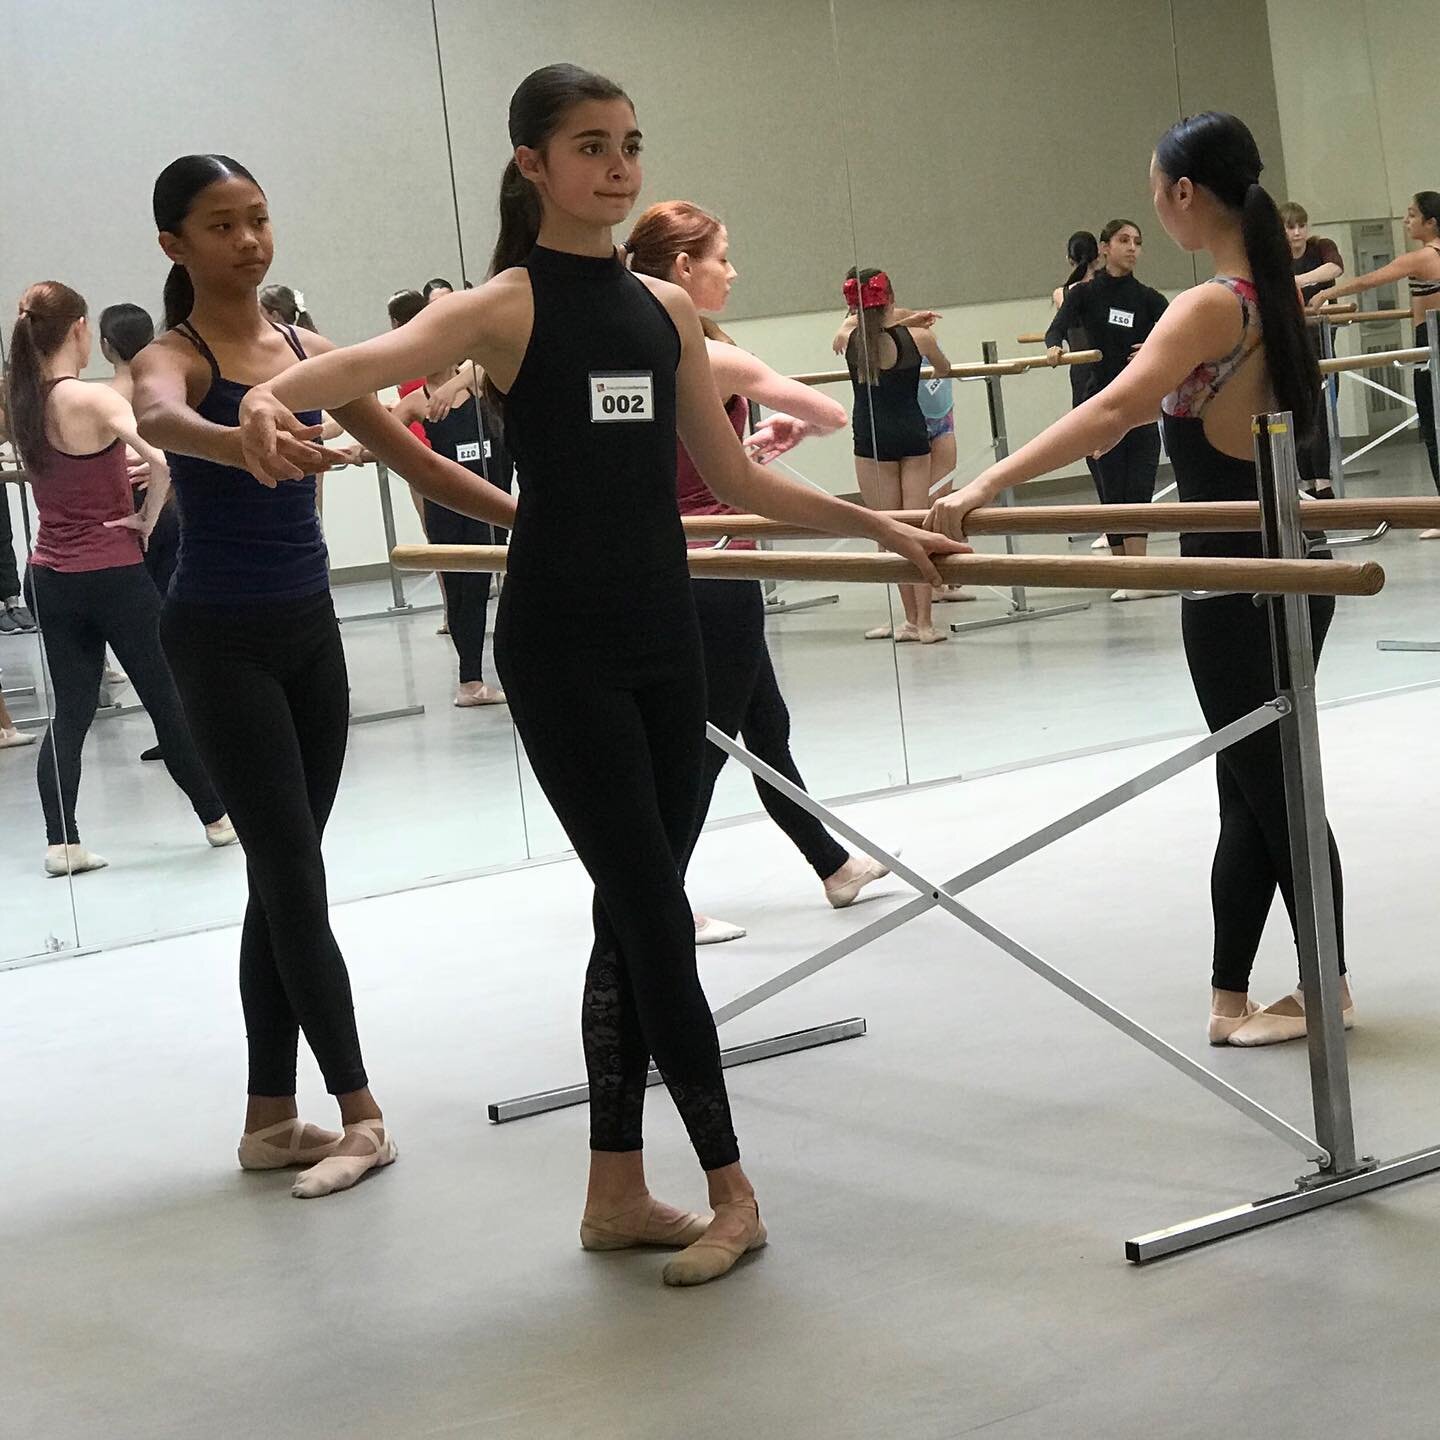 #SUMMERDANCE scholarship auditions may look a little different this year, but they&rsquo;re still happening!⠀
⠀
Join us Sunday, January 10 at 1pm PST via Zoom for scholarship consideration to attend 2021 HYBRID SUMMER DANCE WITH BACKHAUSDANCE AT CHAP